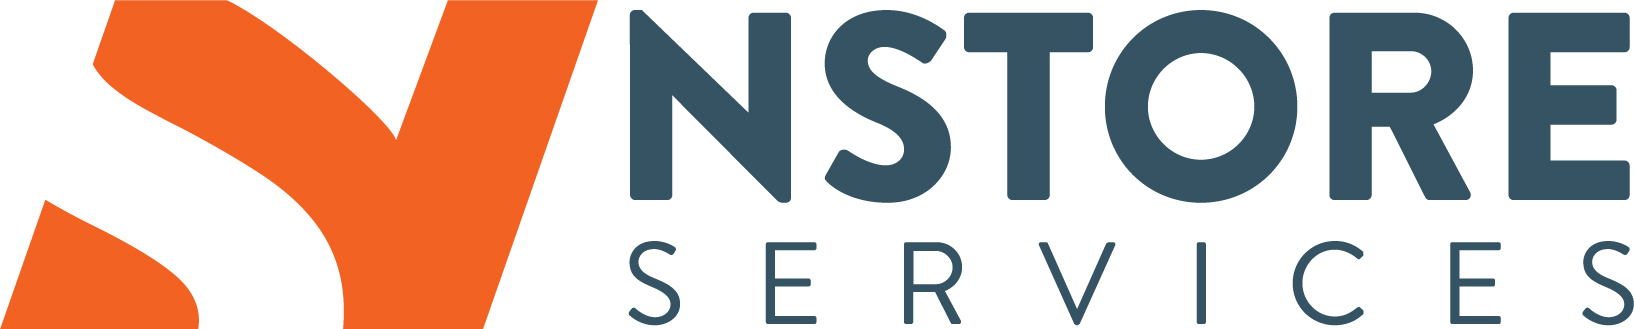 N-Store Services Company Logo